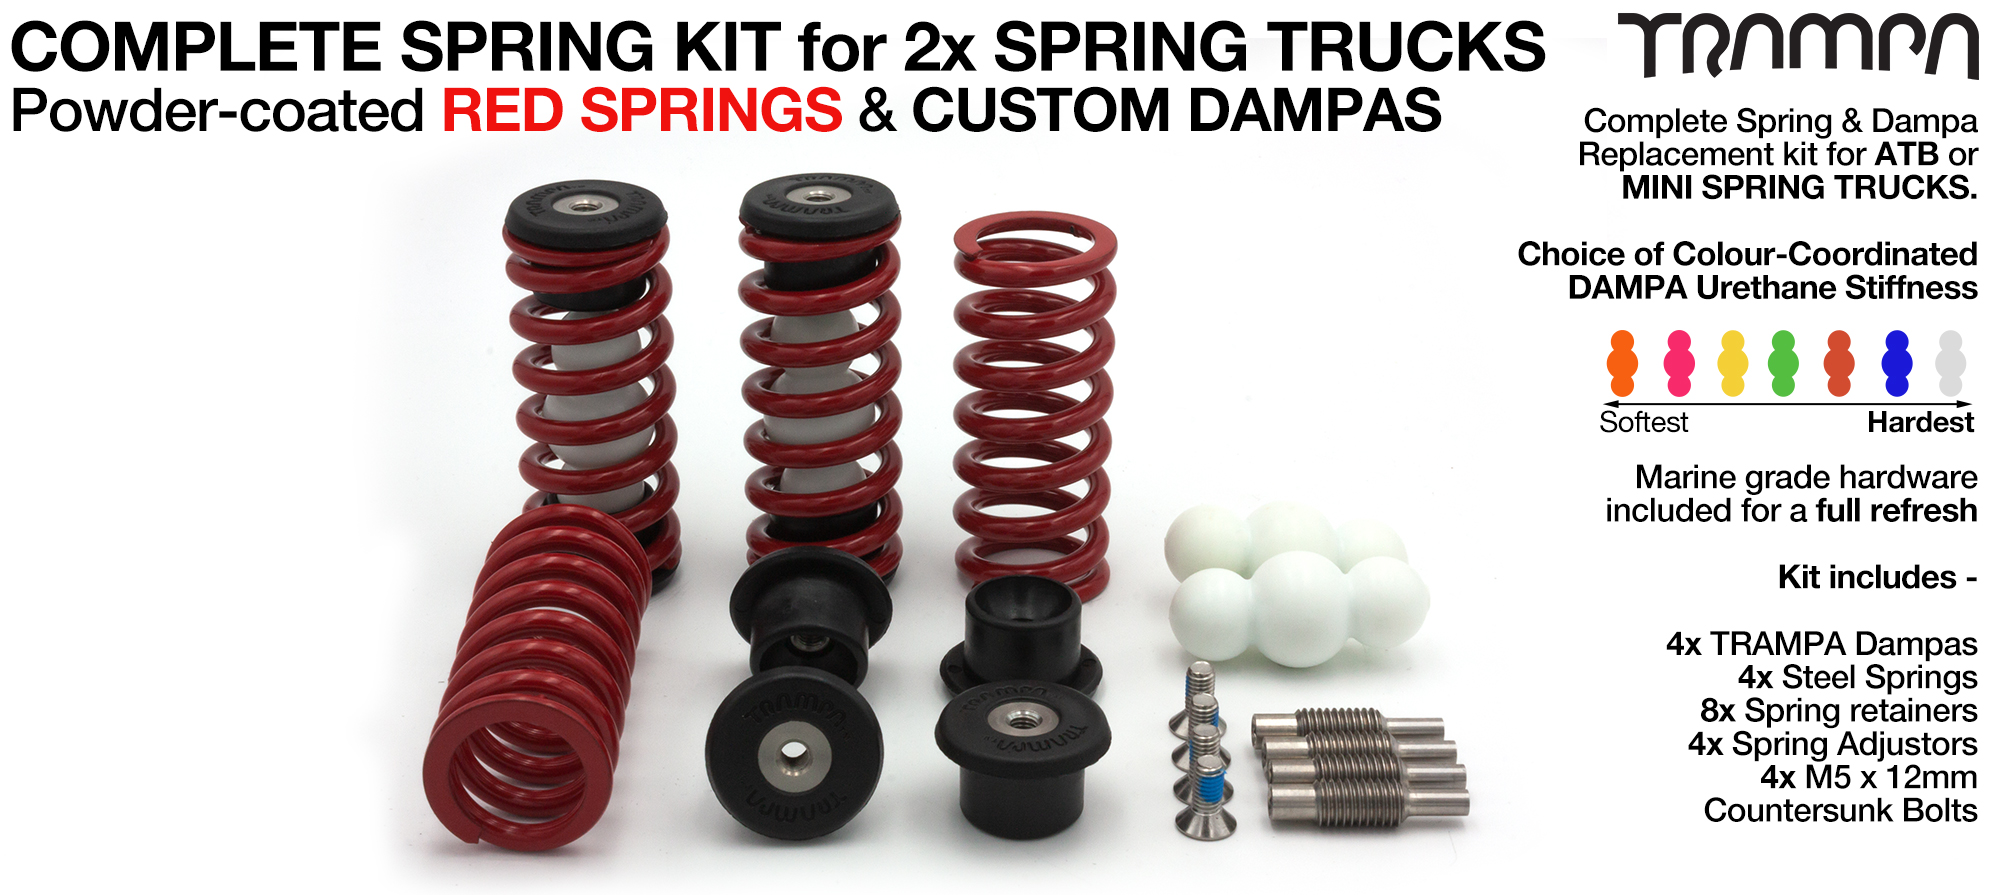 Complete Spring kit for 1x Board = 4x RED Springs 4x Dampa 8x Spring Retainers 4x Spring Adjuster & 4 M5x12mm Countersunk Bolt 